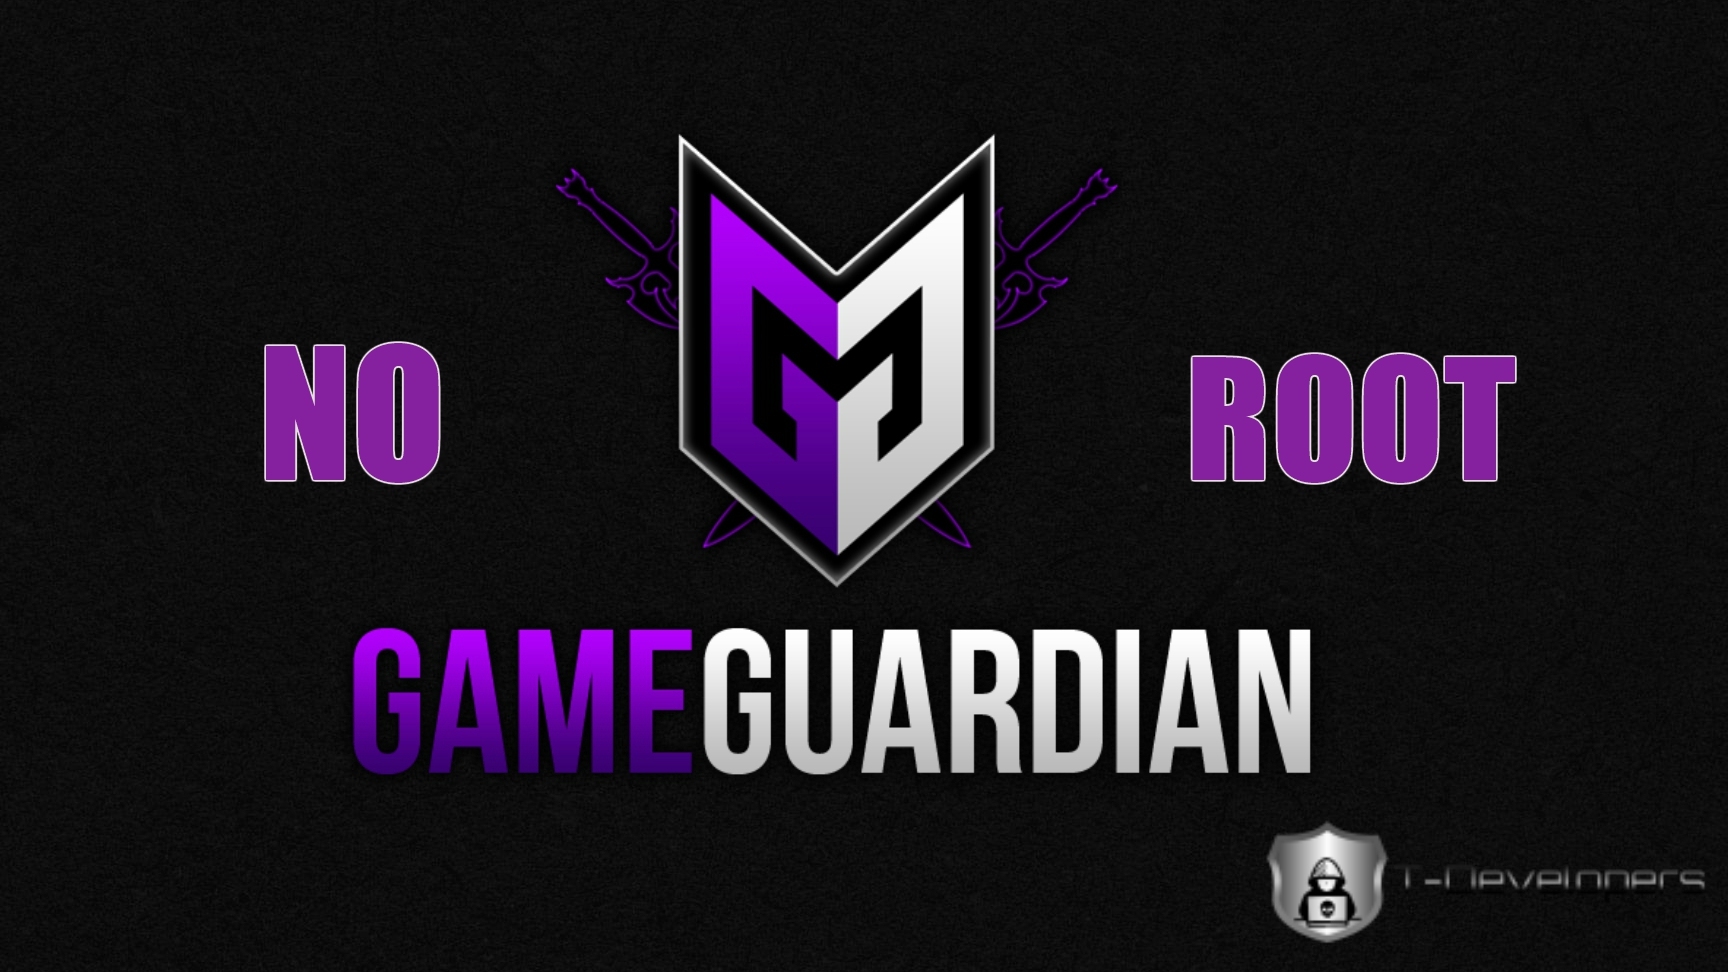 Гаме гуардиан. Гейм гуардиан. GAMEGUARDIAN Official. Guardian v.